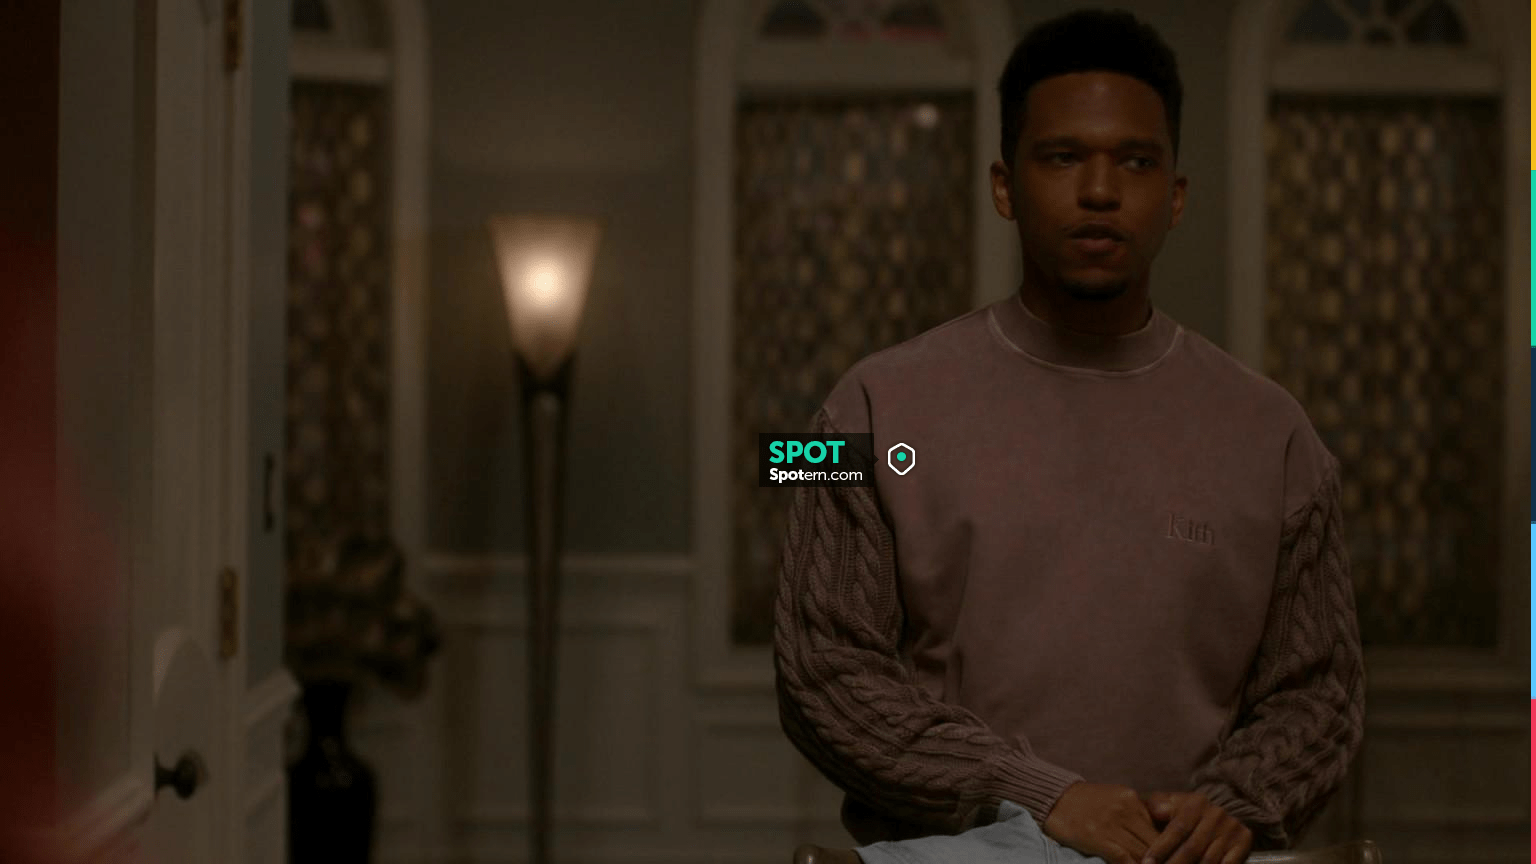 Givenchy sweatshirt with metallic details worn by Cane Tejada (Woody  McClain) as seen in Power Book II: Ghost TV show wardrobe (S02E03)